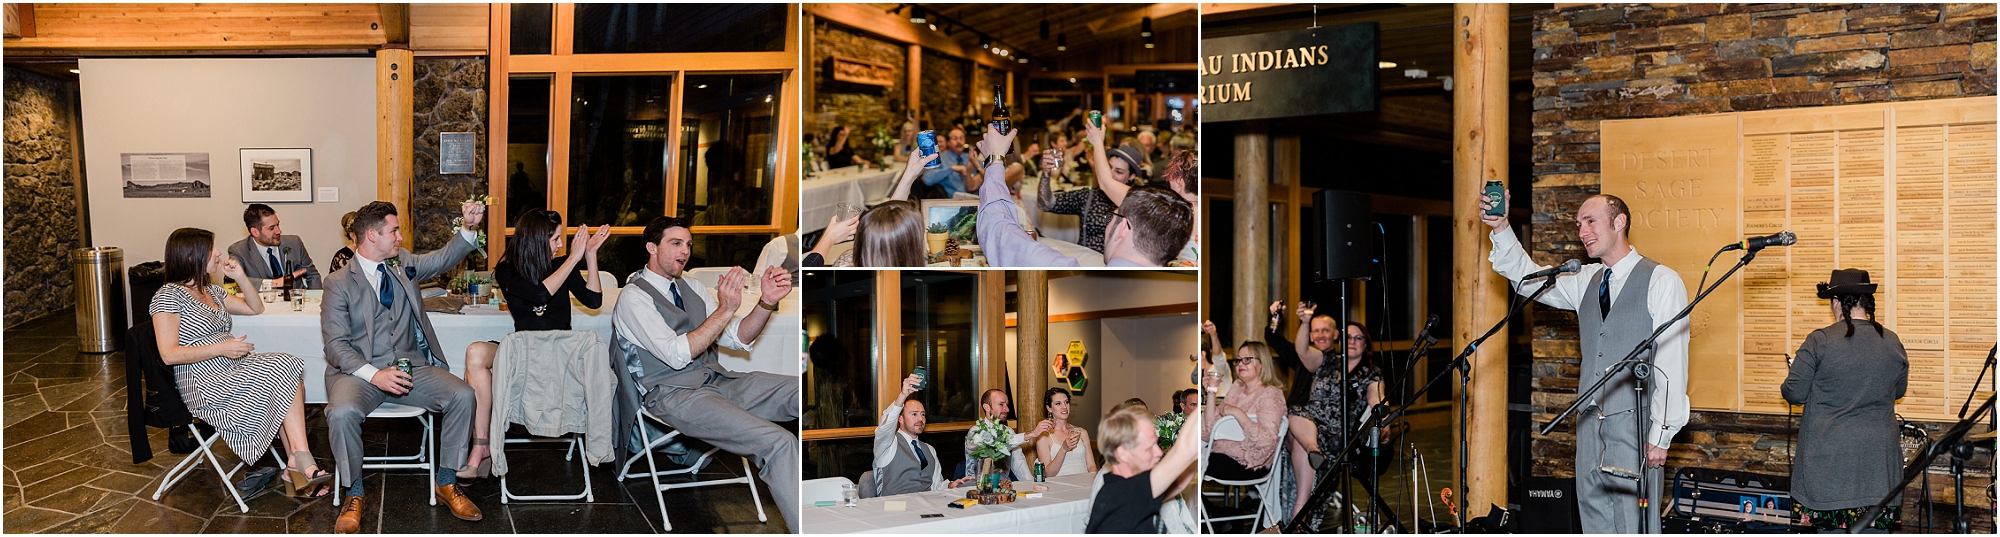 Brothers give the best toasts at your Oregon wedding. | Erica Swantek Photography